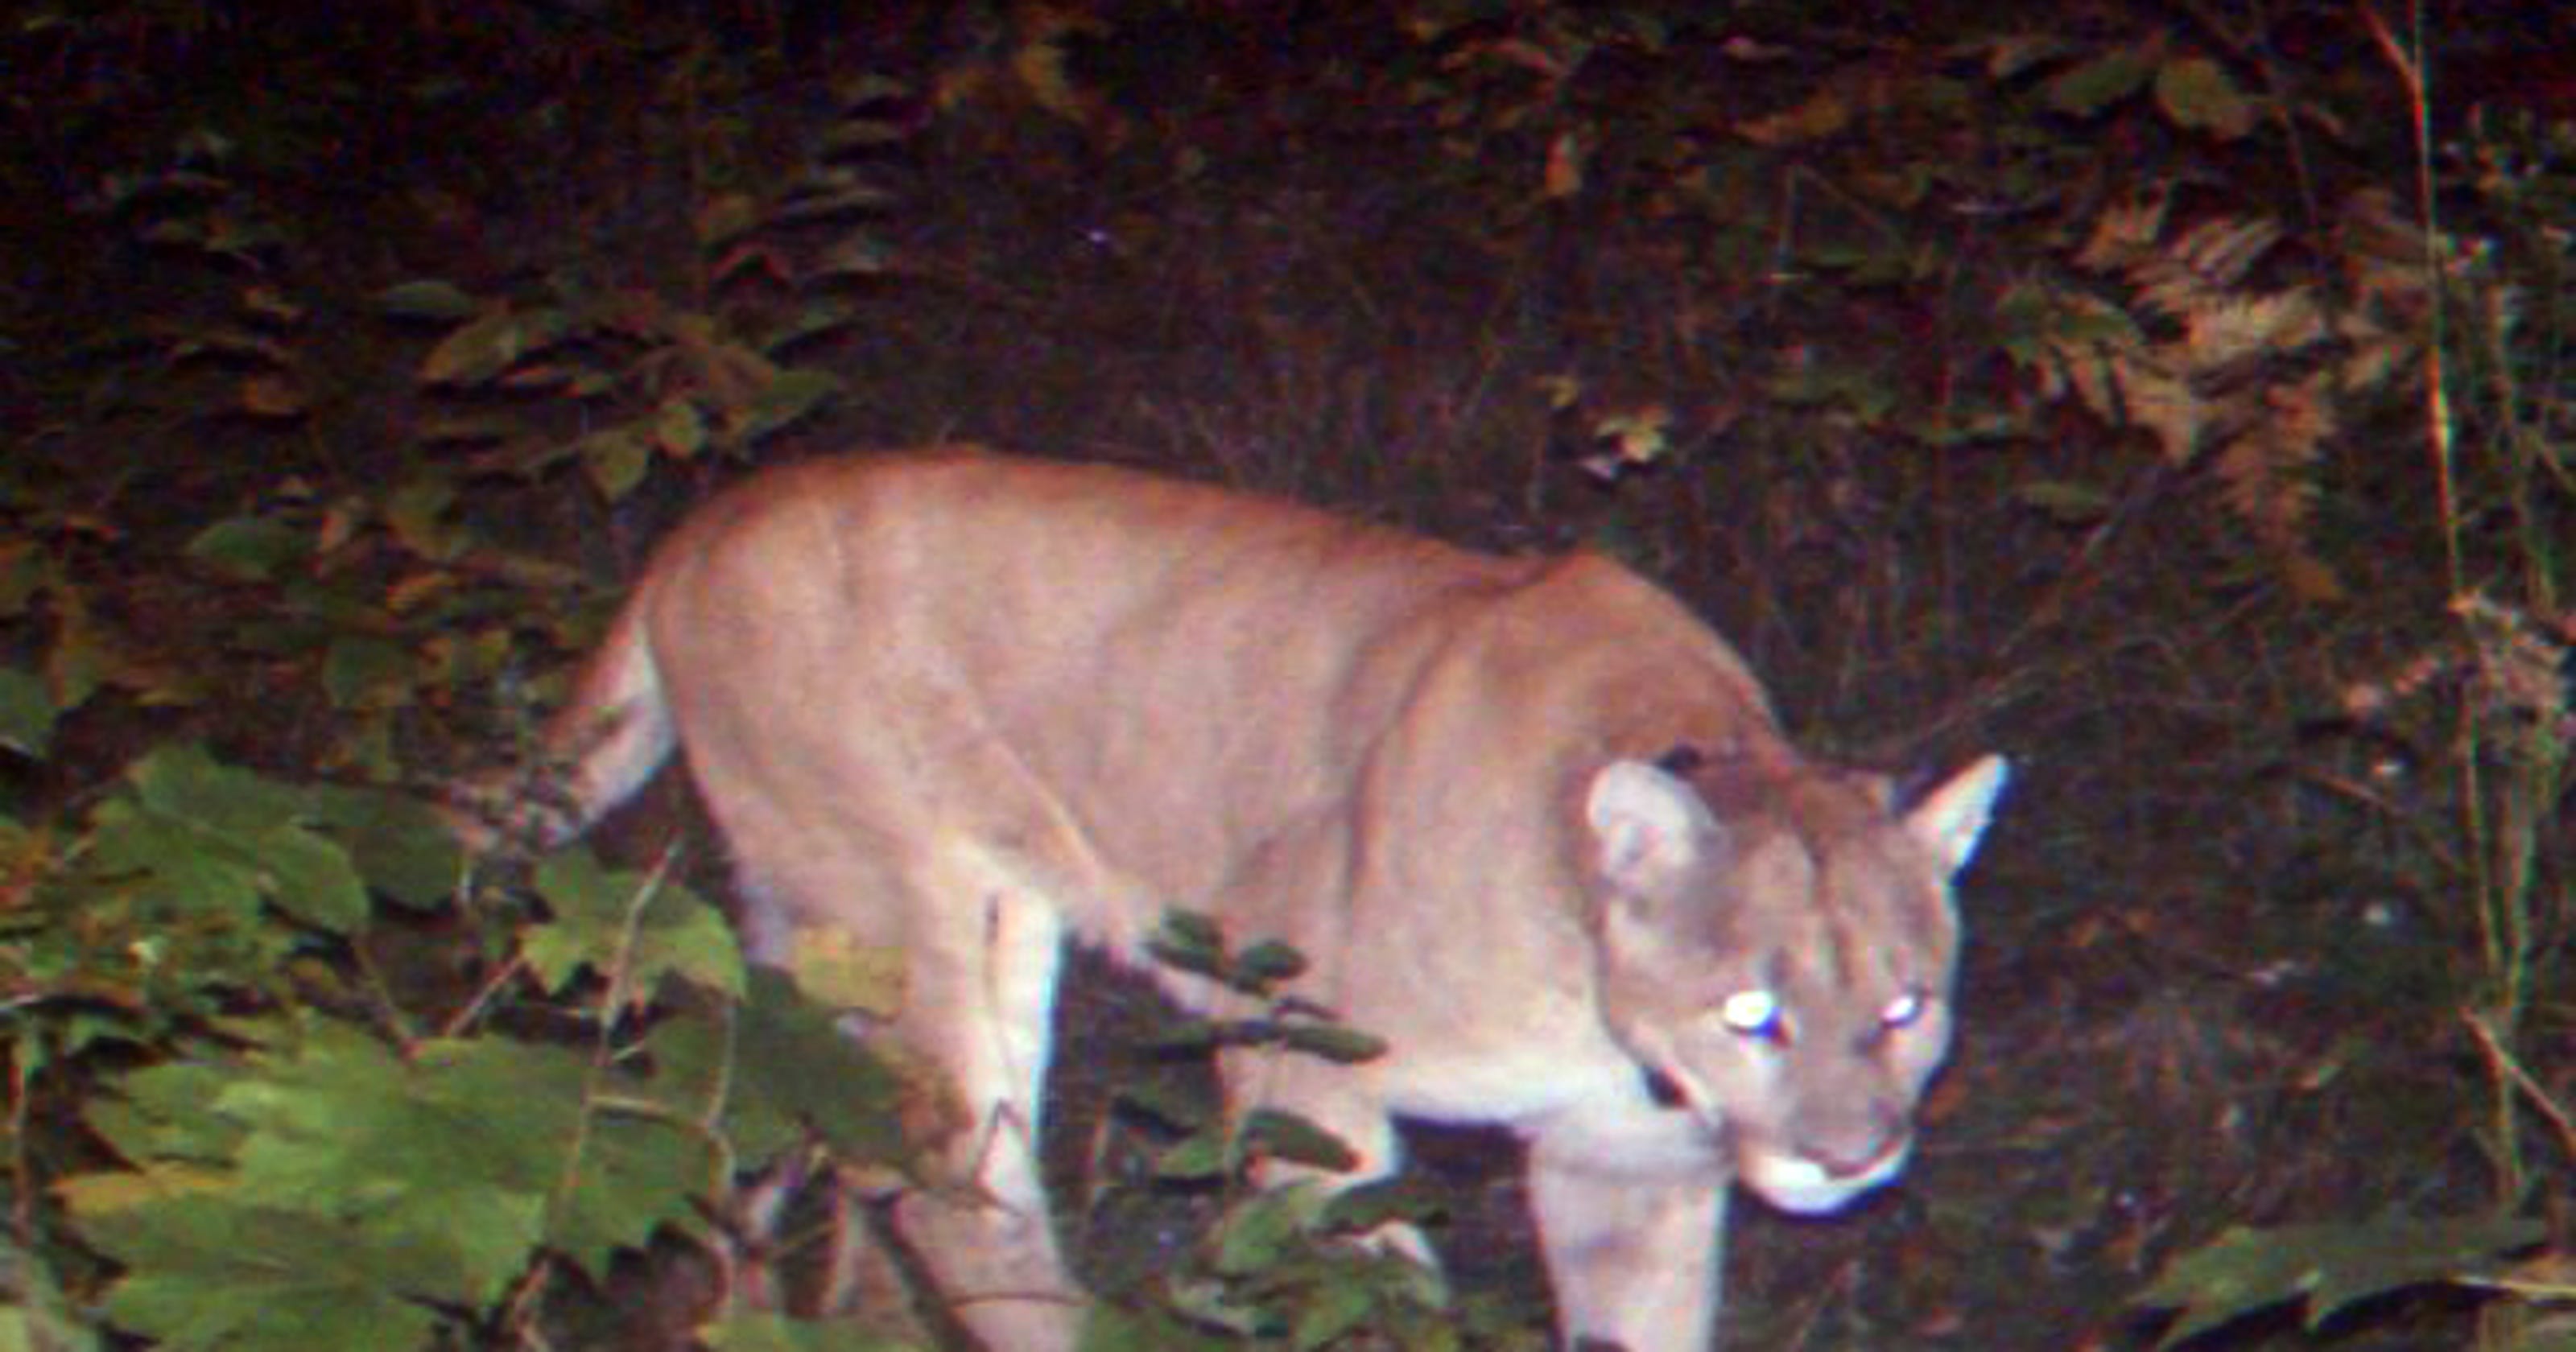 Michigan Dnr Confirms 2 Cougar Sightings In Eastern Up